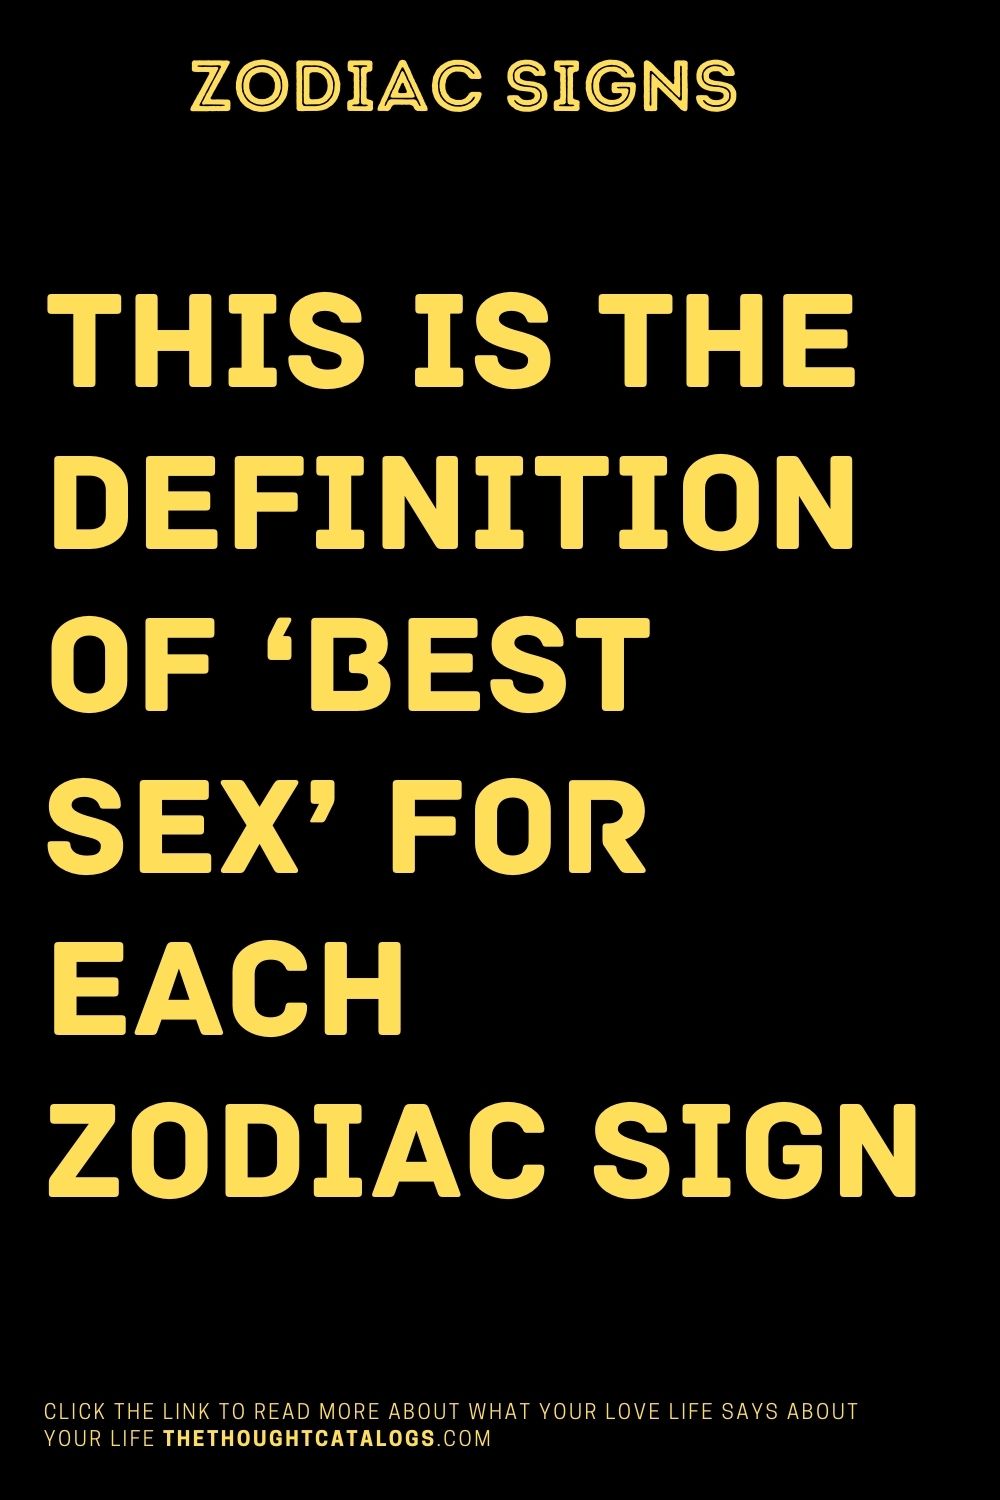 This Is The Definition Of ‘Best Love’ For Each Zodiac Sign